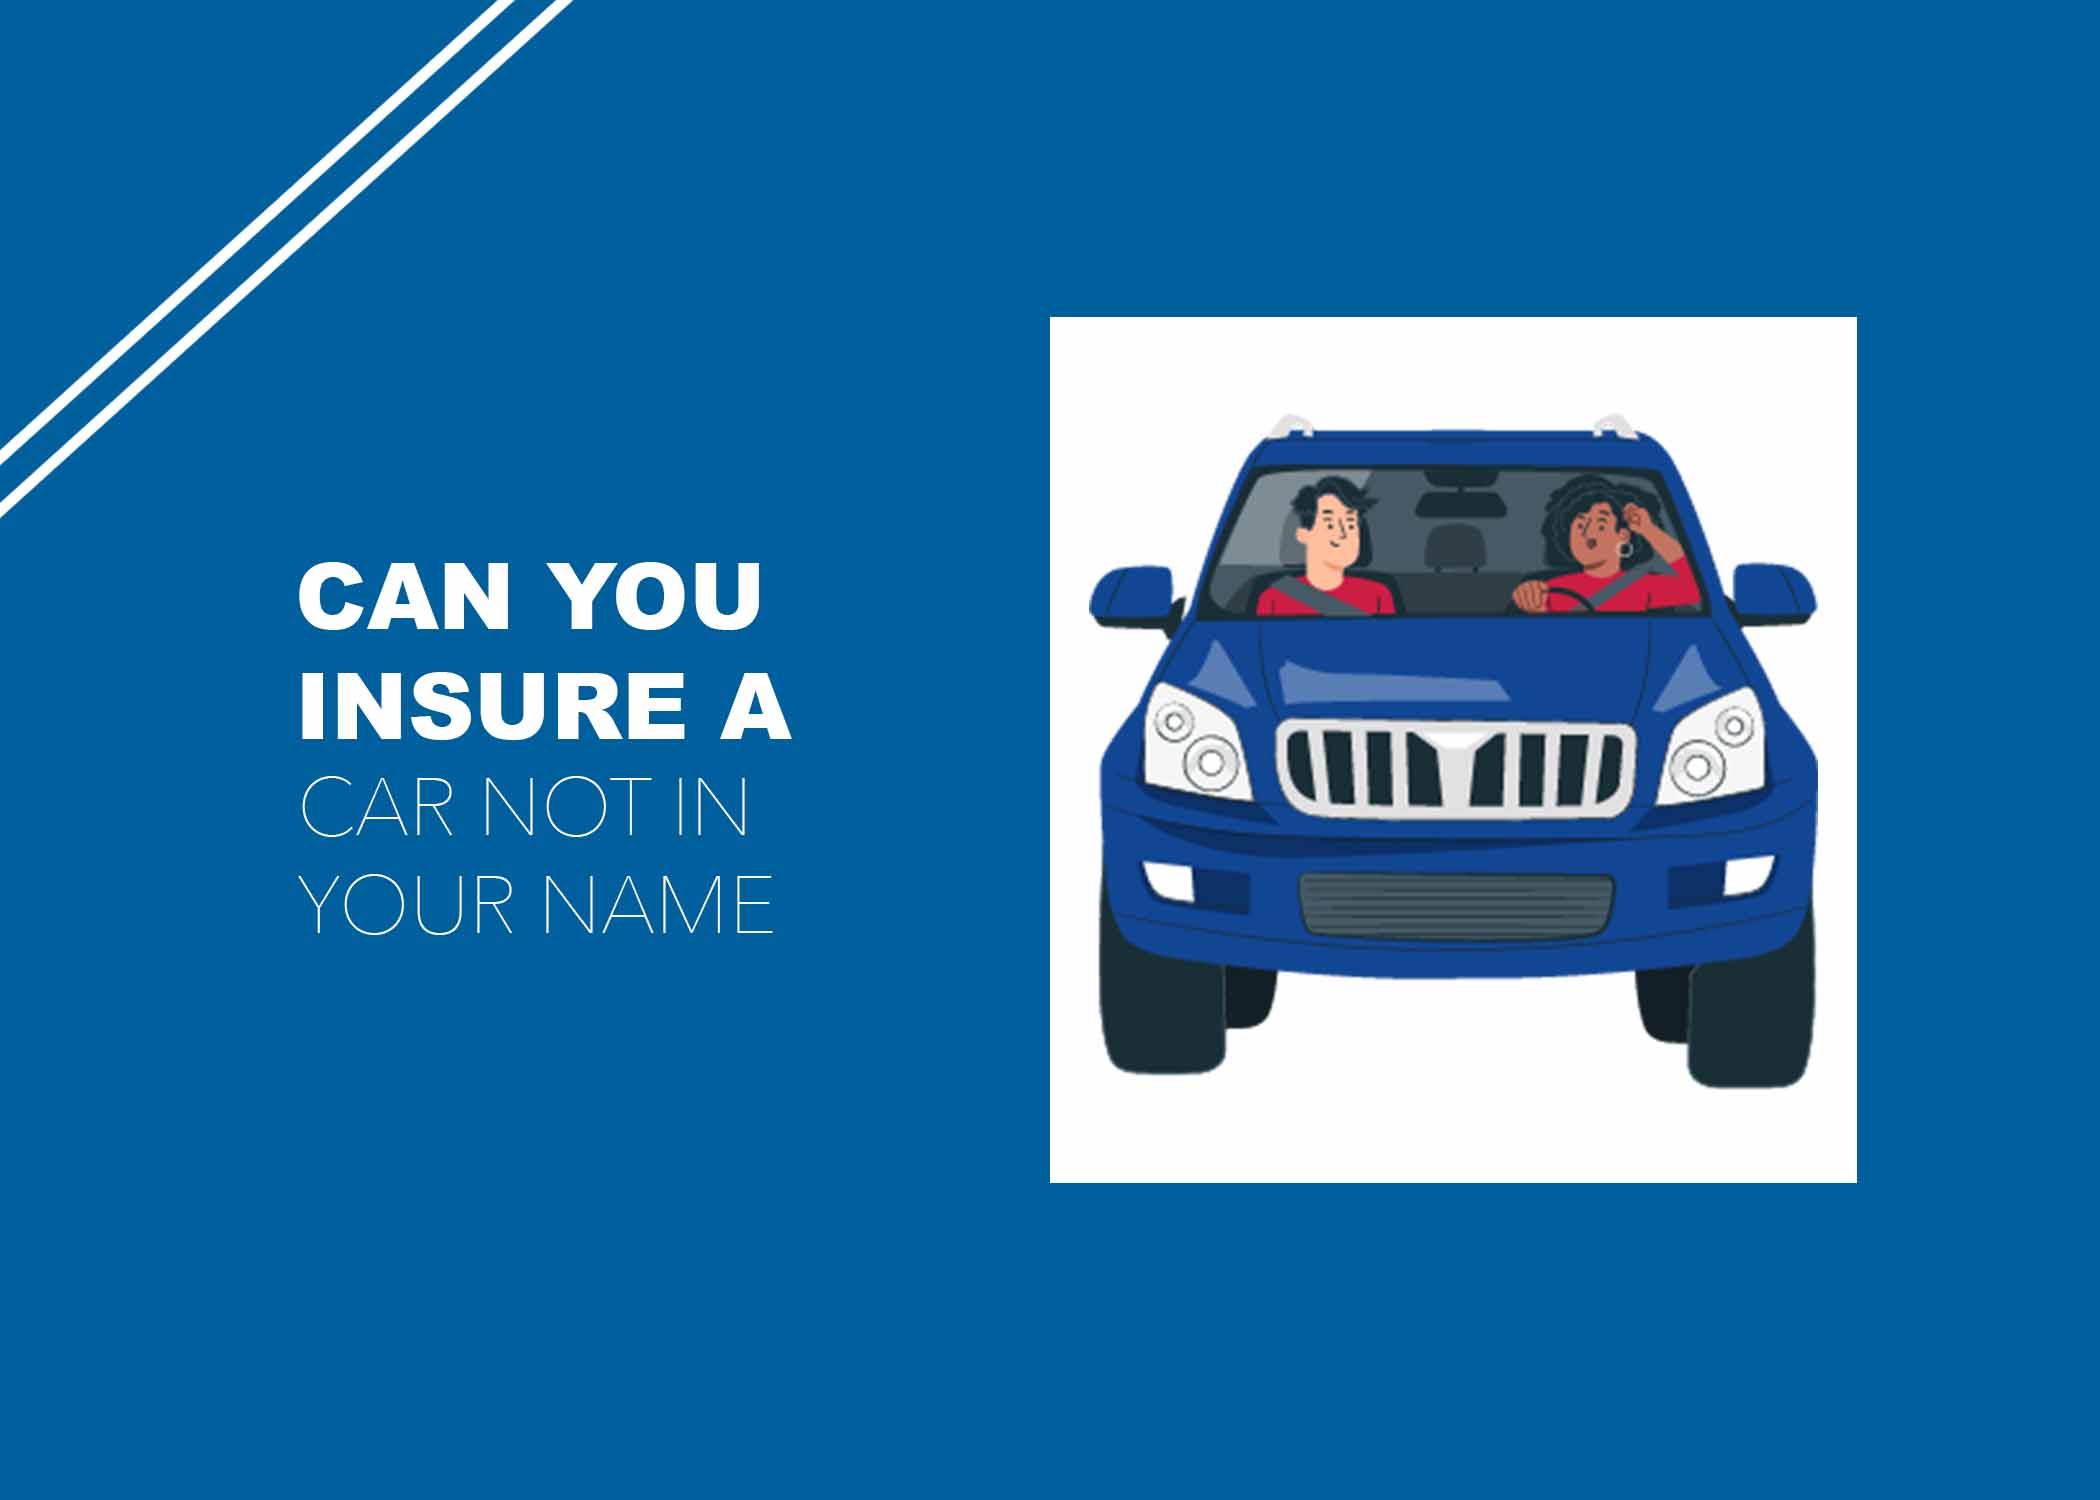 Can You Insure a Car Not in Your Name?